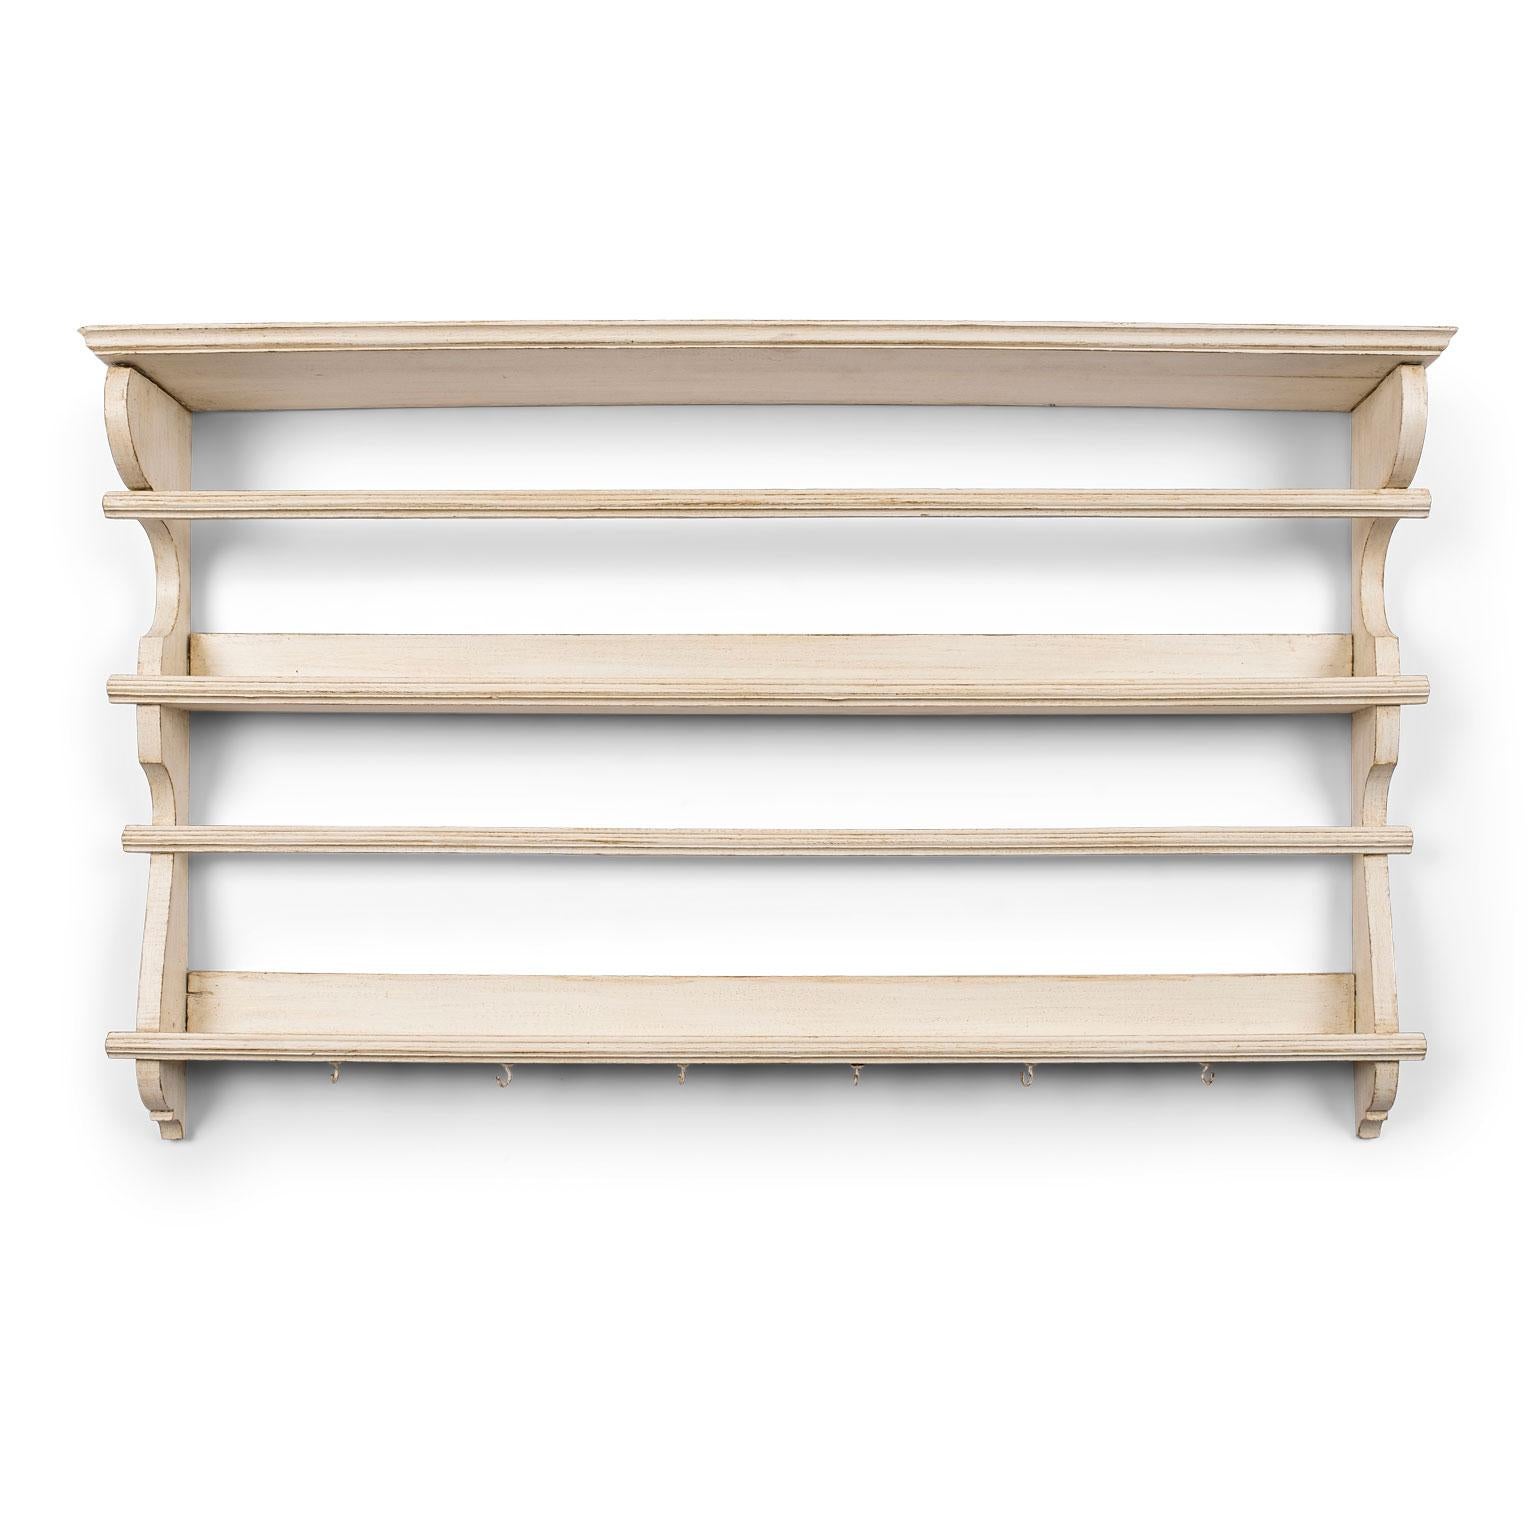 Cream-painted French plate rack dating to the 19th century. Painted finish not original. Top shelf will accommodate plates up to ten inches diameter and lower shelf accommodates plates up to eleven inches diameter.